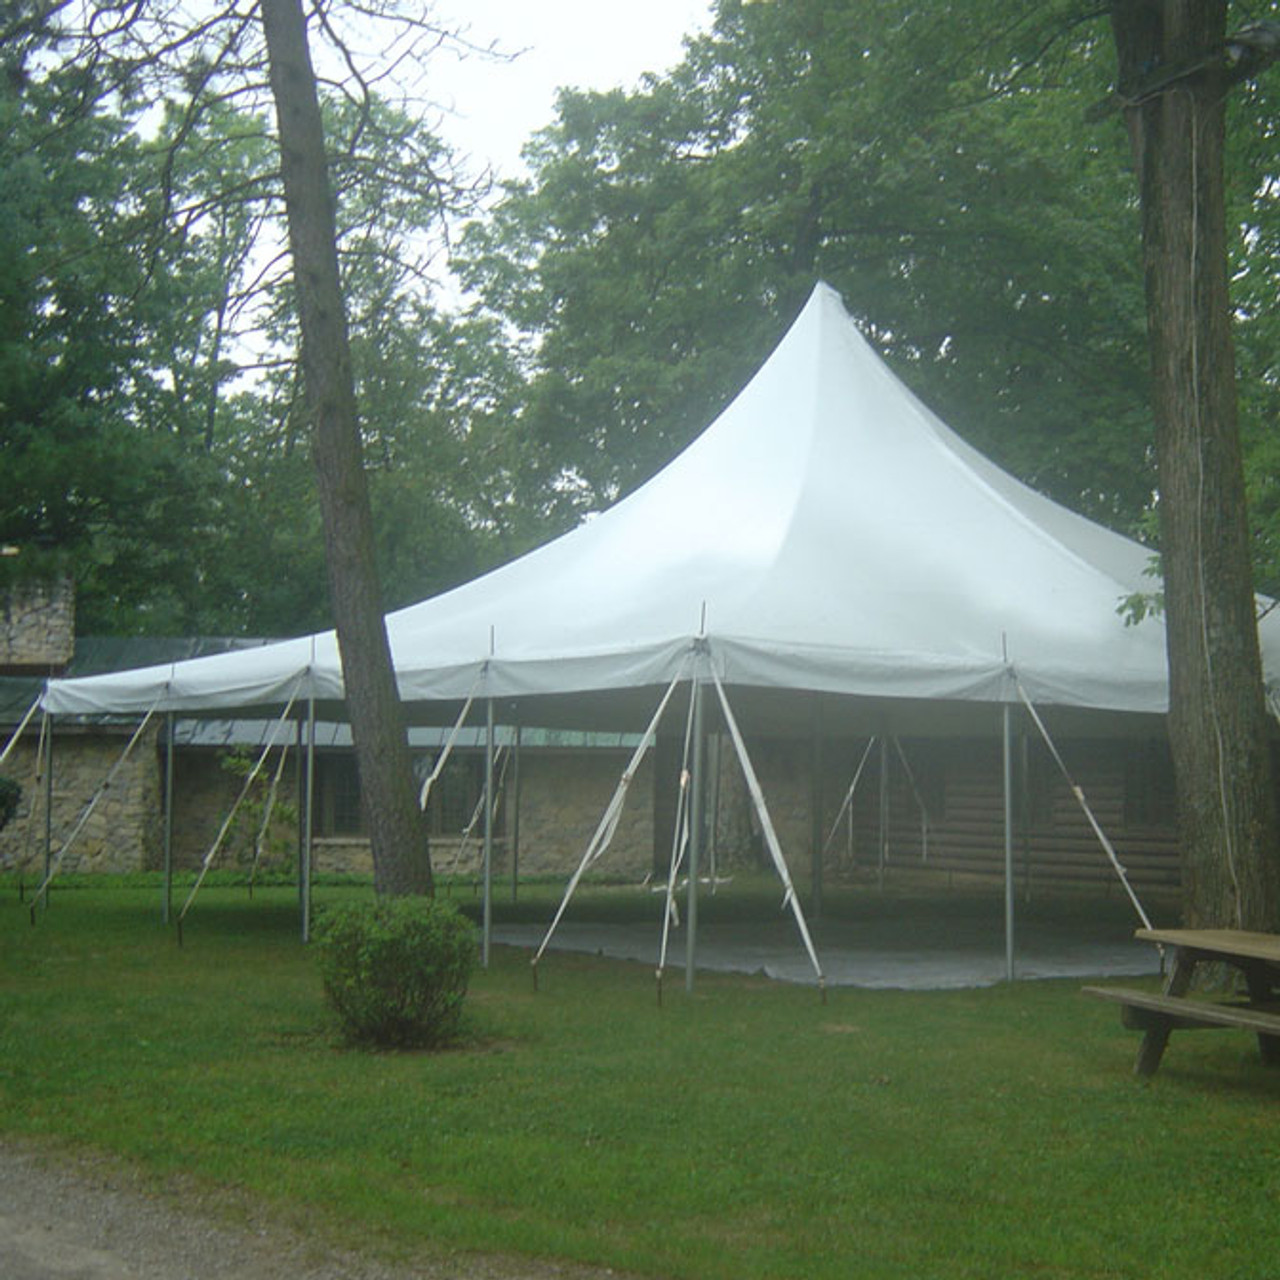 40' x 40' Premiere I Series High Peak Pole Tent, Sectional Tent Top, Complete